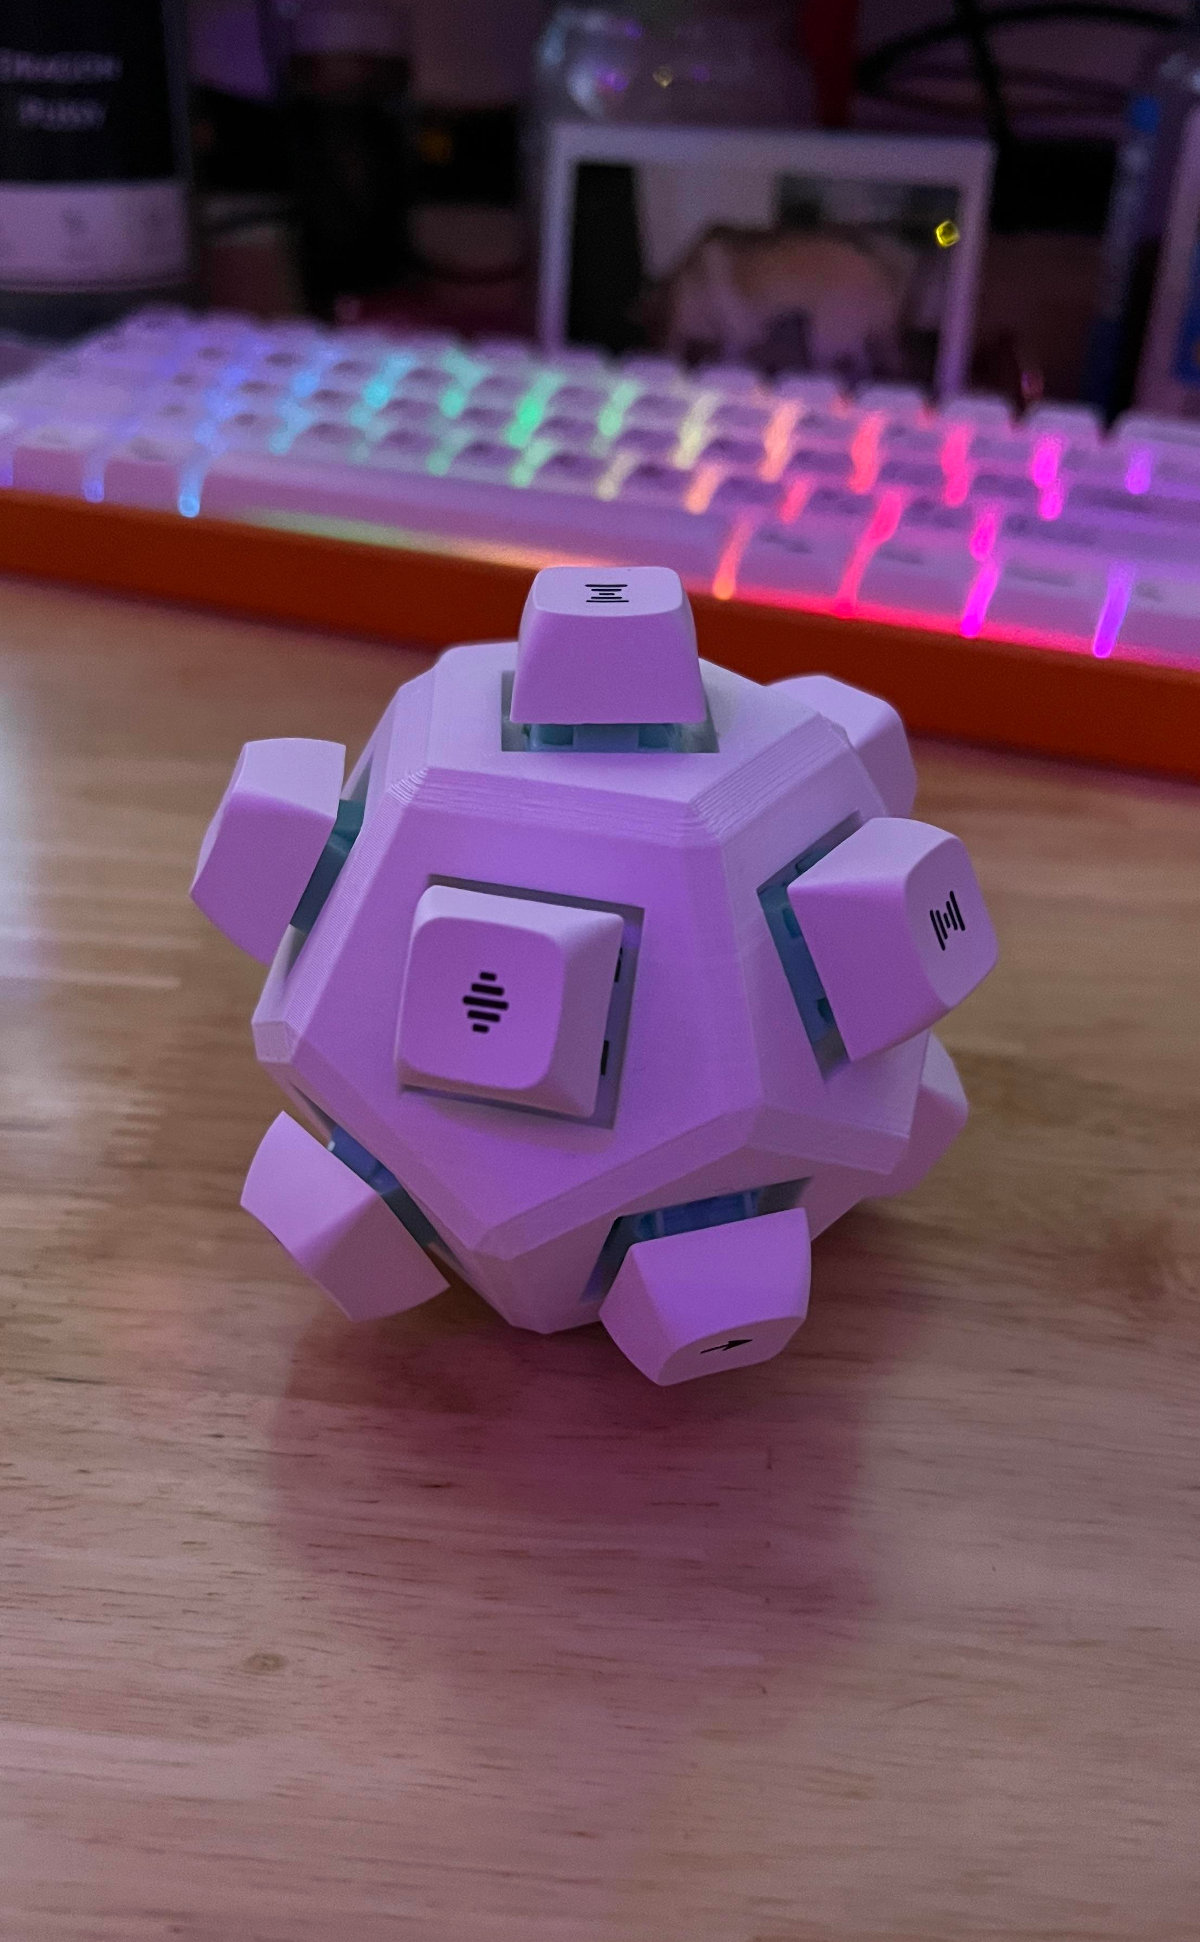 Pic: Dodecahedron switch holder